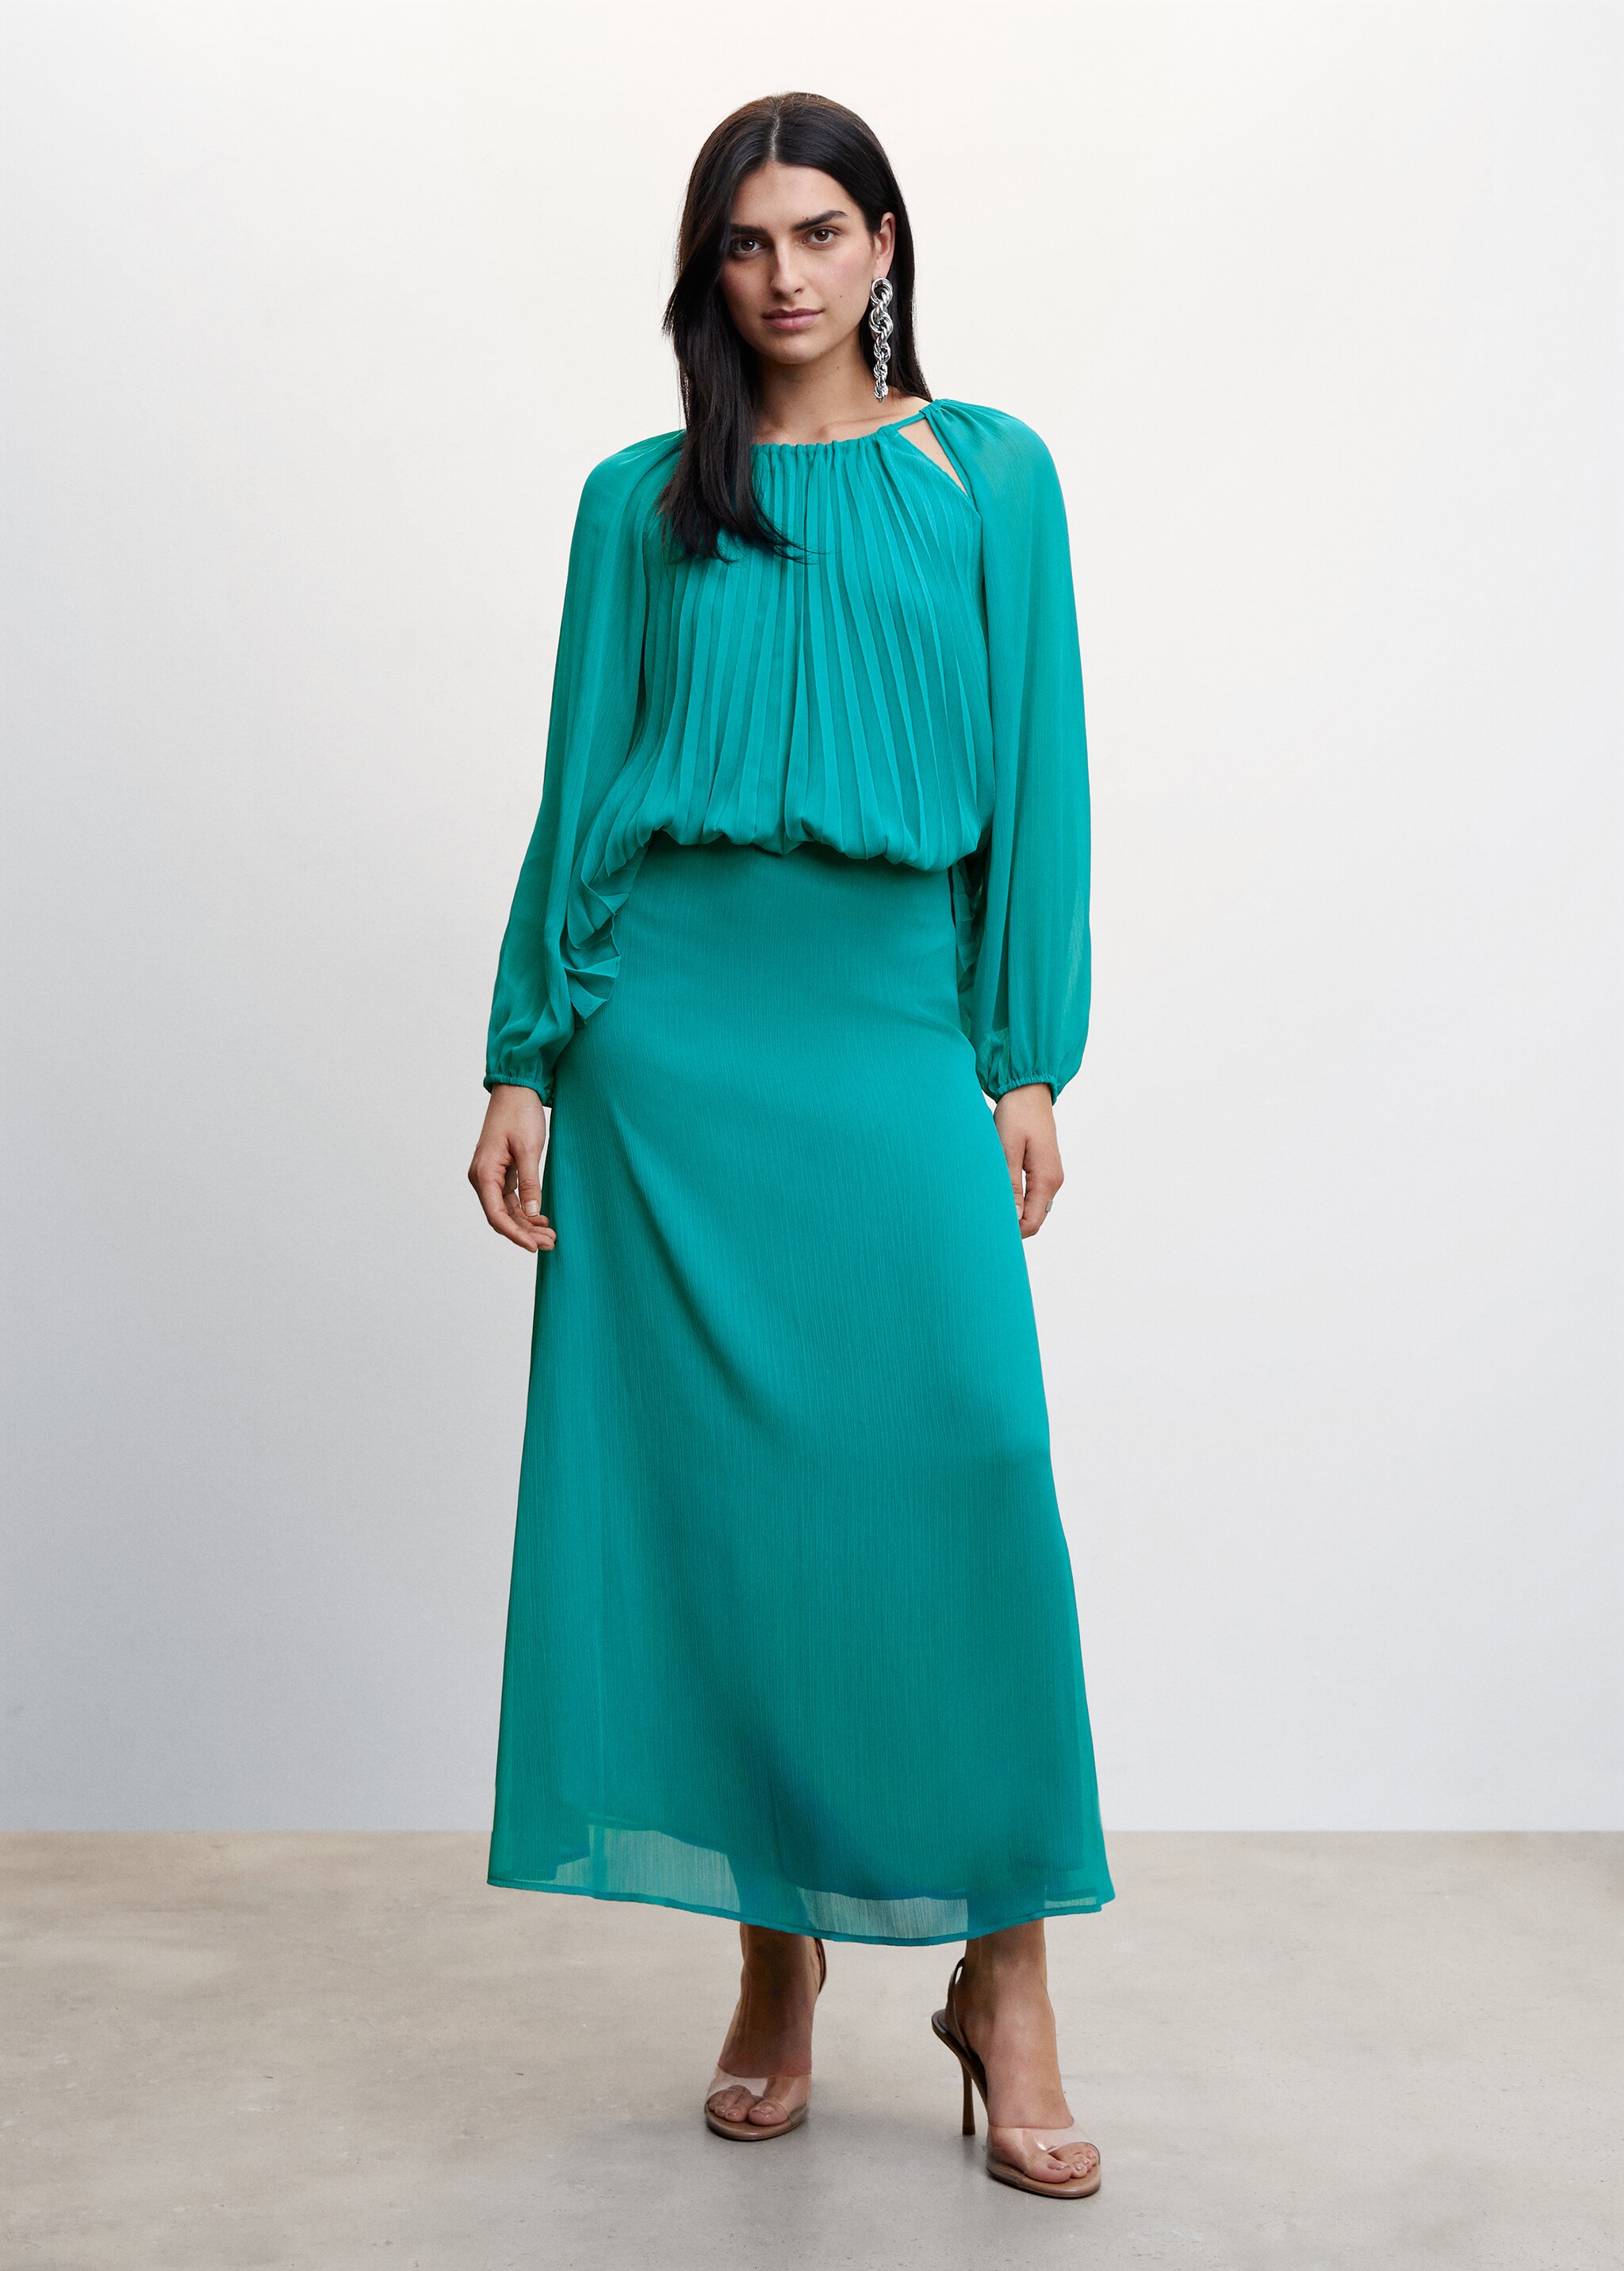 Pleated off-the-shoulder blouse - General plane